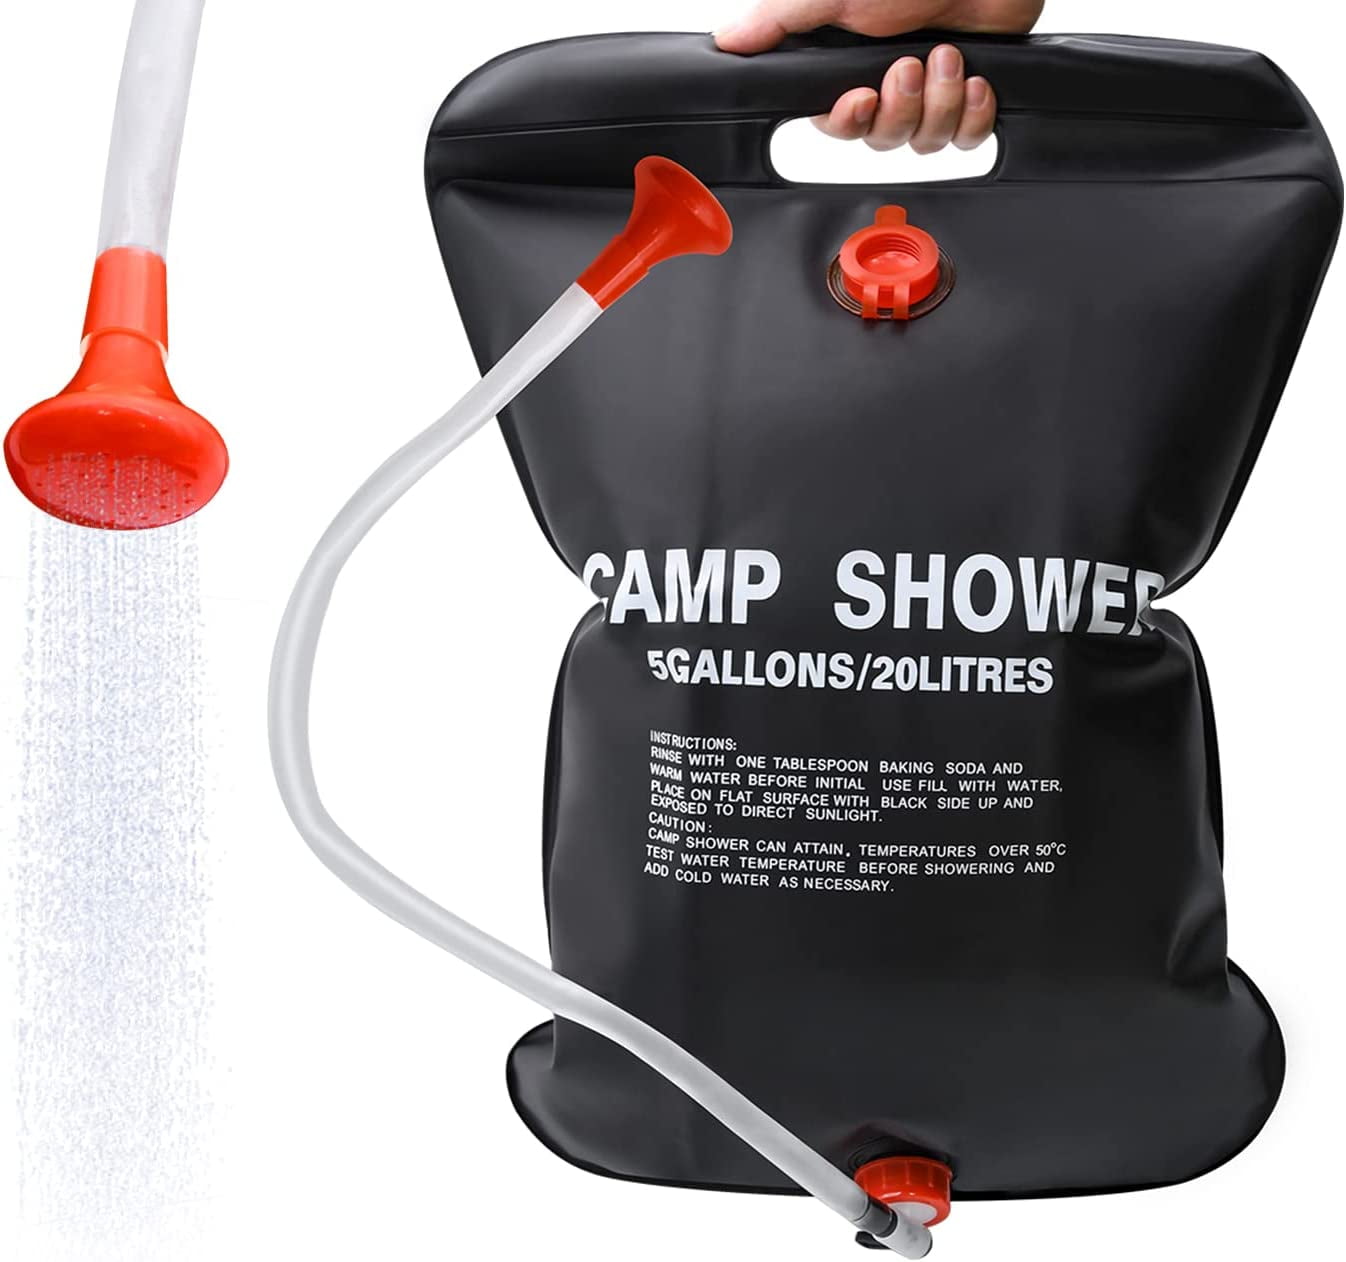 Portable Outdoor Shower - Camp Shower 5 Gallon Capacity by Sirius Survival